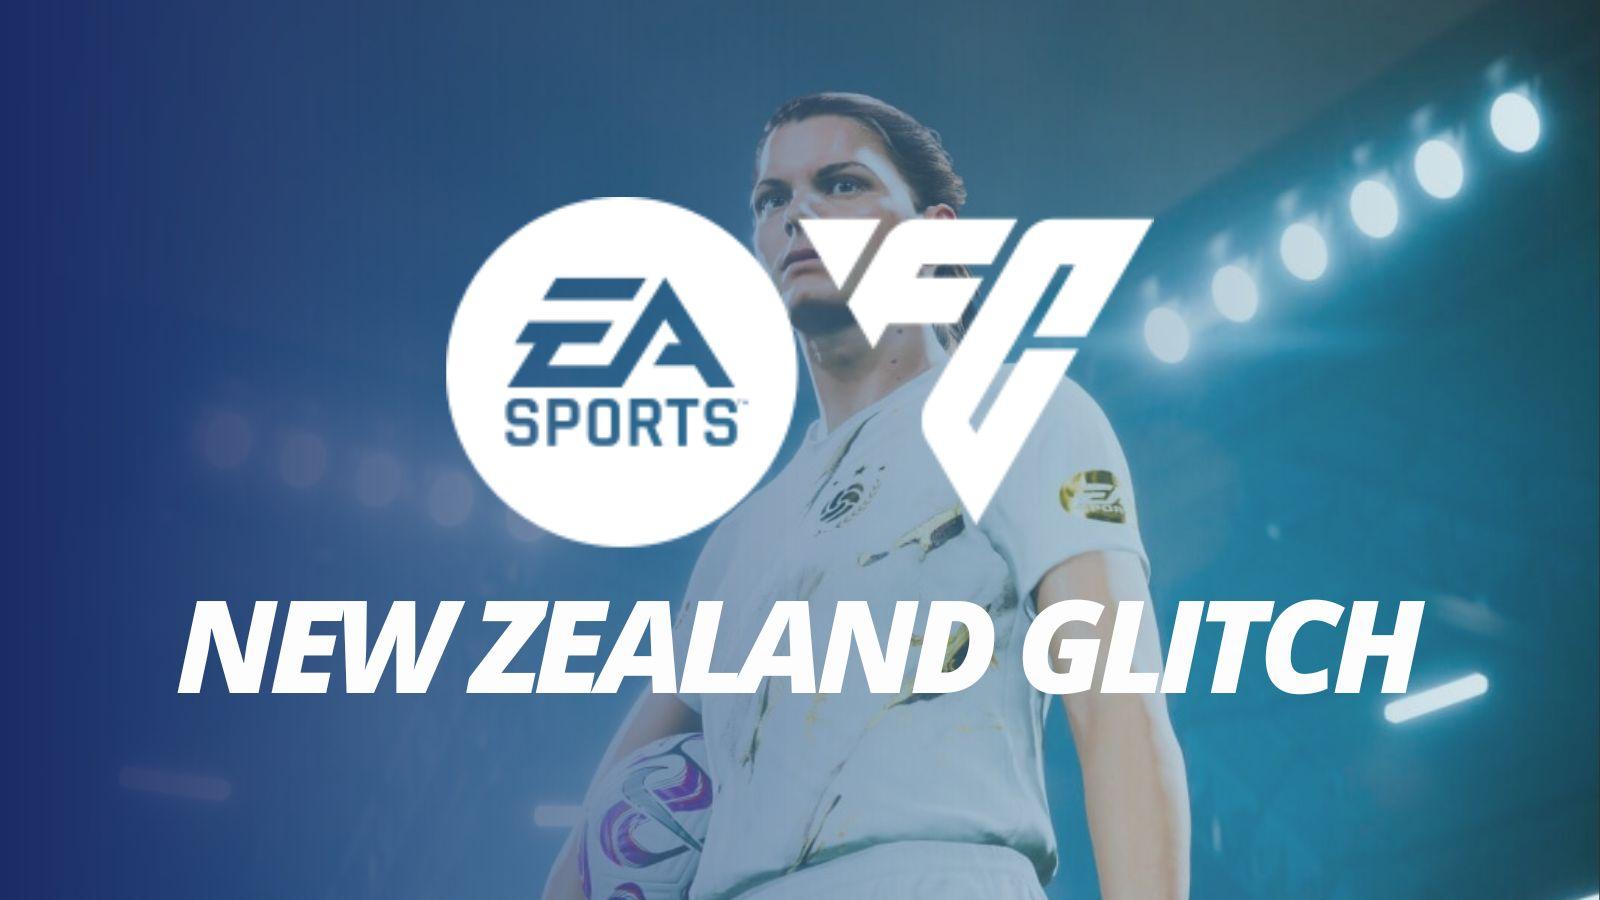 EA FC text with new zealand glitch and logo